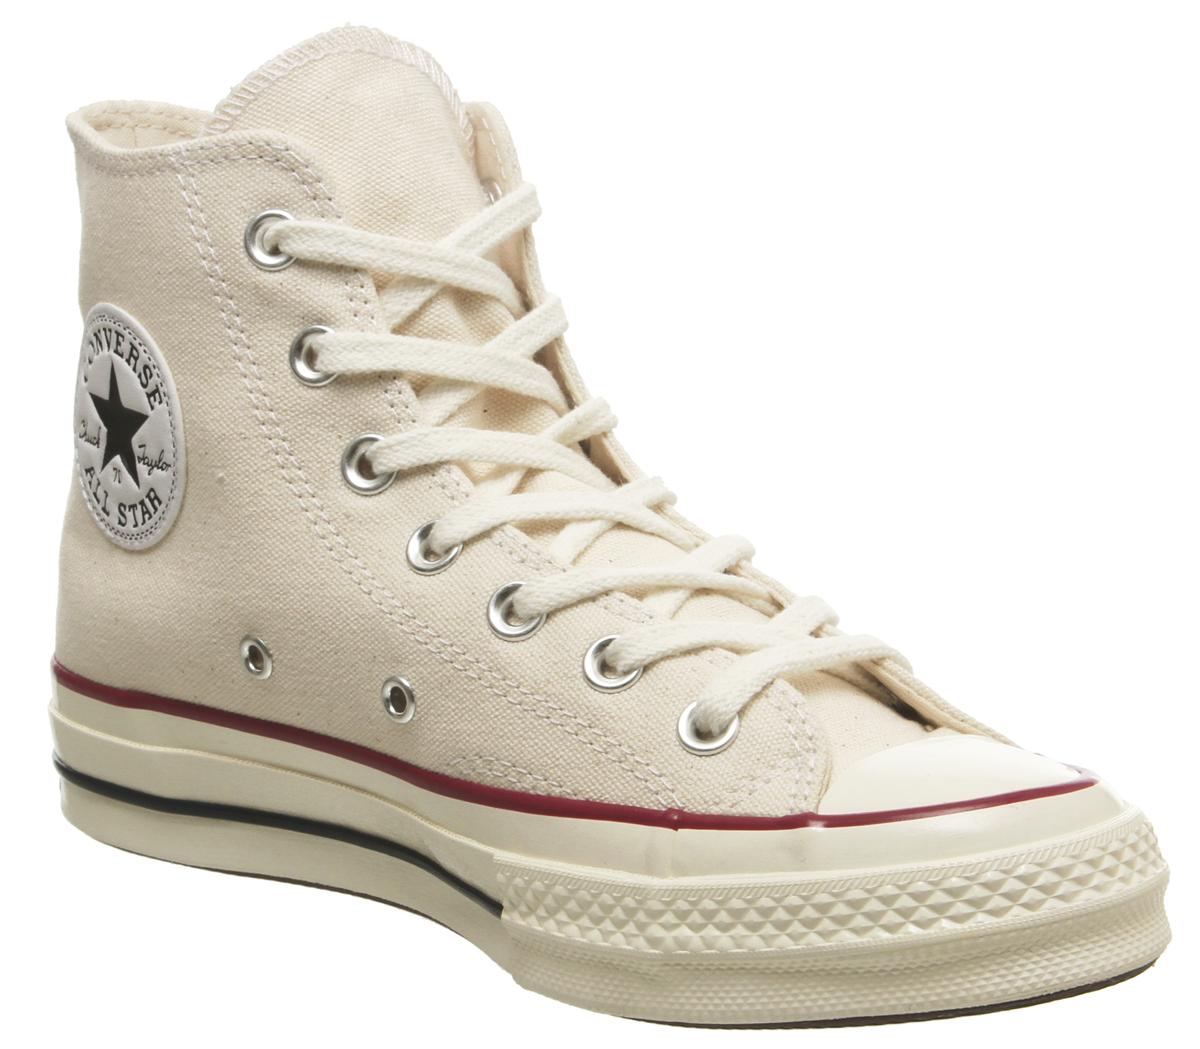 converse all star next day delivery